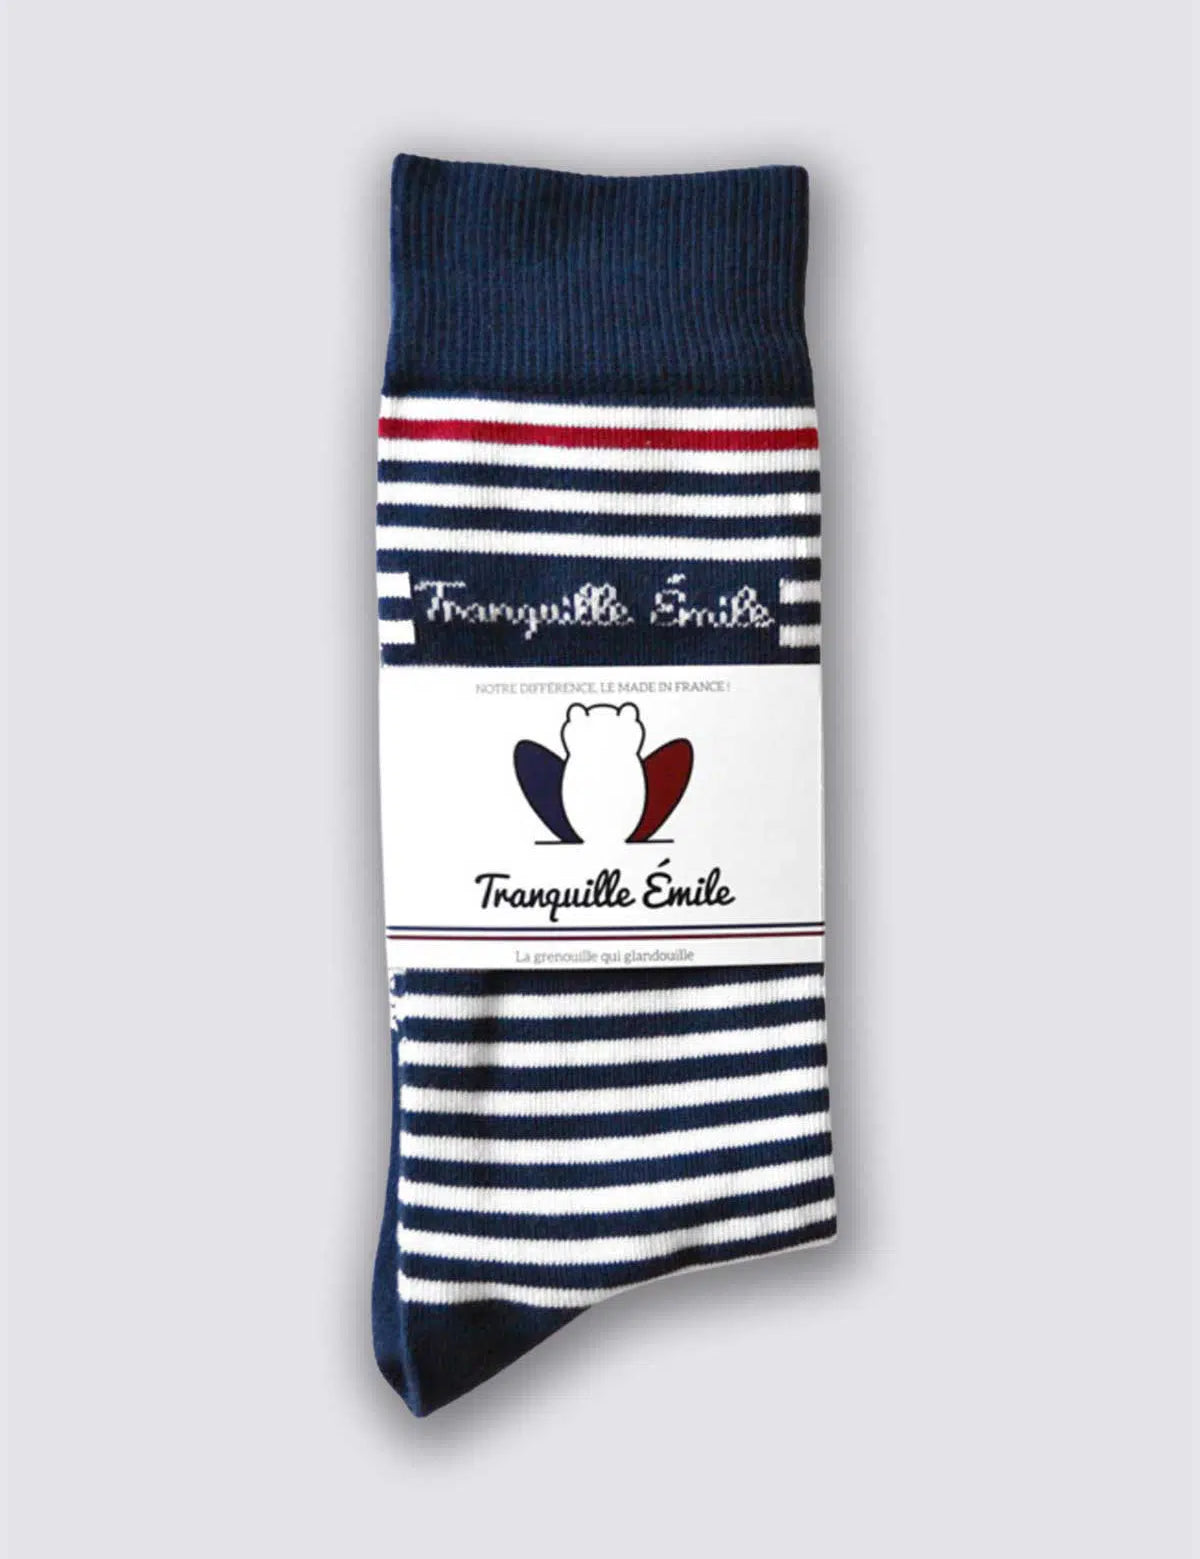 chaussettes-made-in-france-tranquille-emile-les-rayees-5_jpg.webp